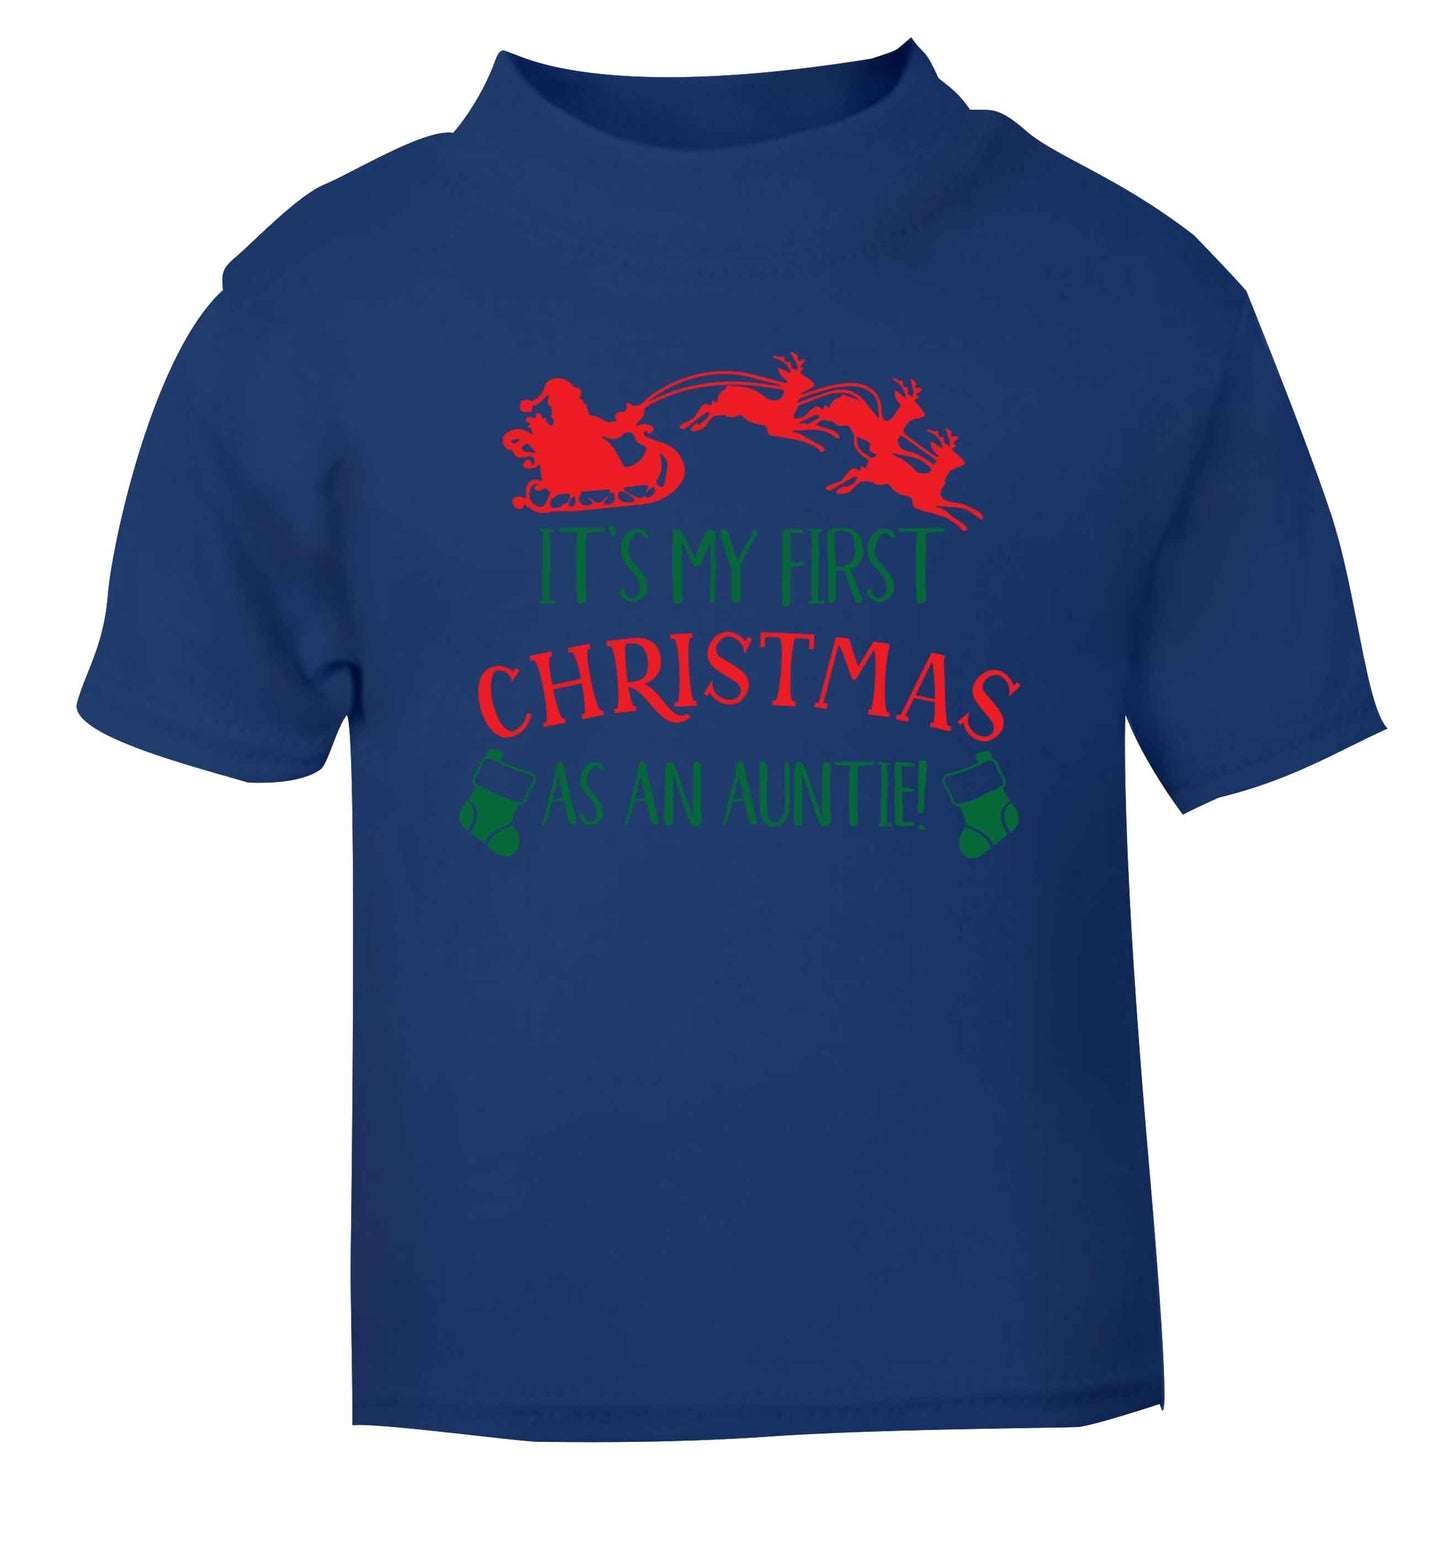 It's my first Christmas as an auntie! blue Baby Toddler Tshirt 2 Years